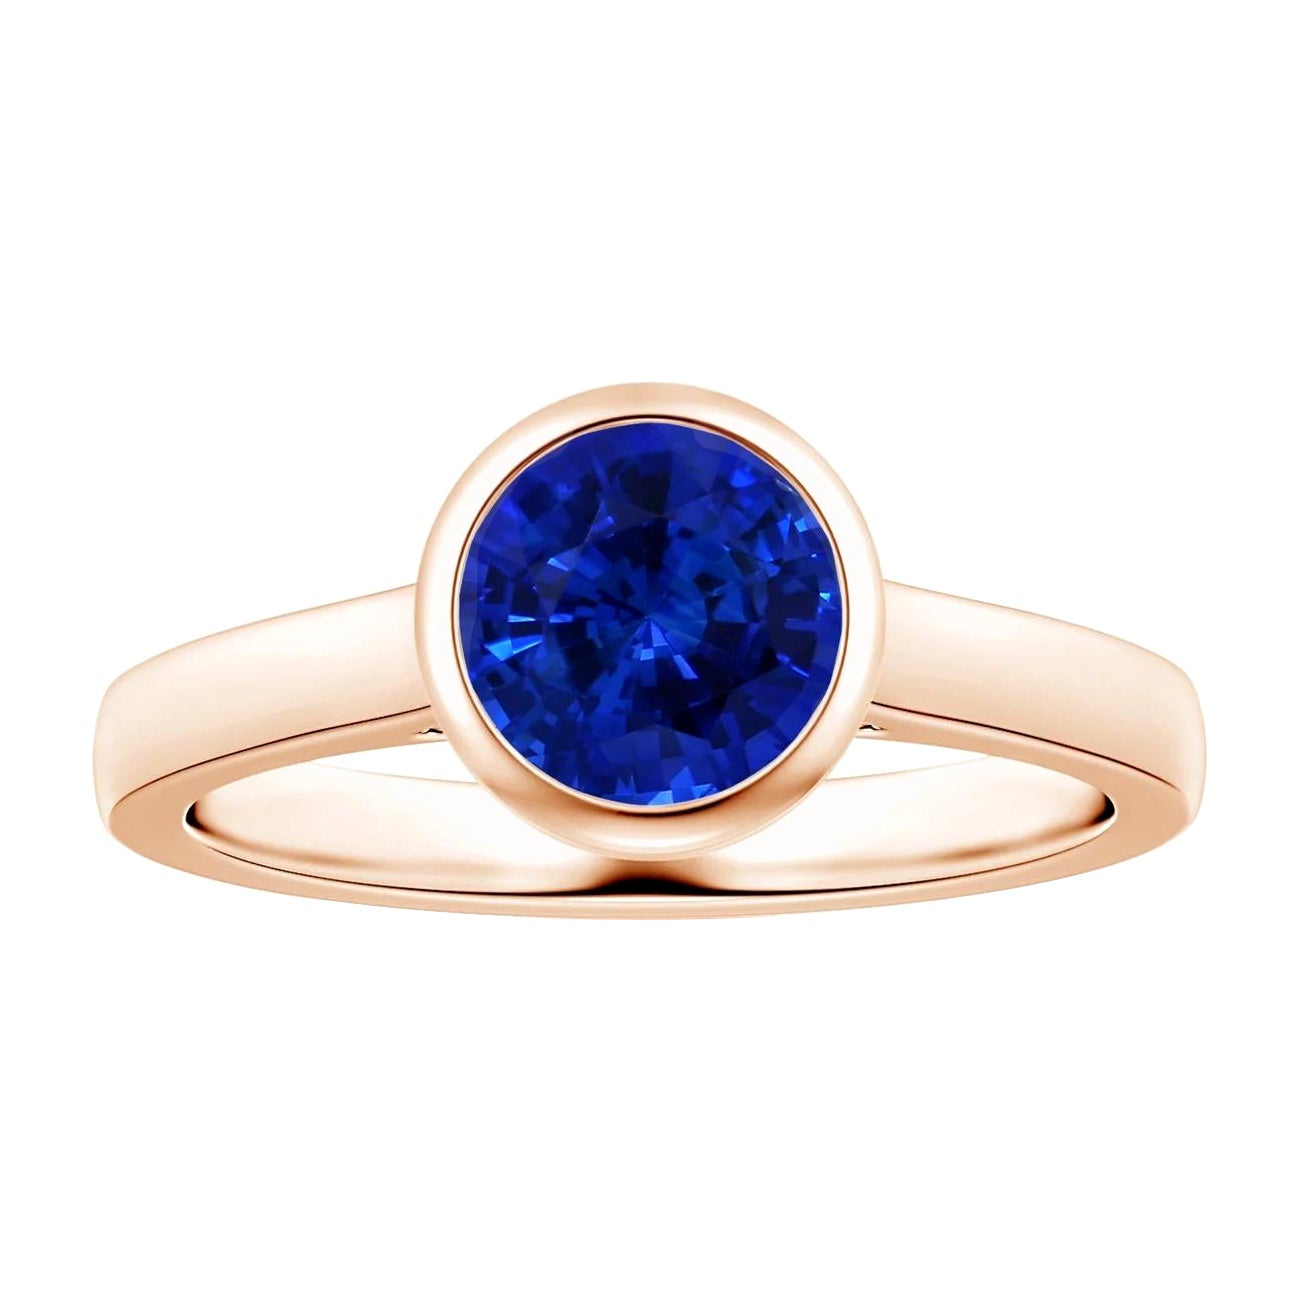 For Sale:  Angara Bezel-Set Gia Certified Round Sapphire Solitaire Ring in Rose Gold